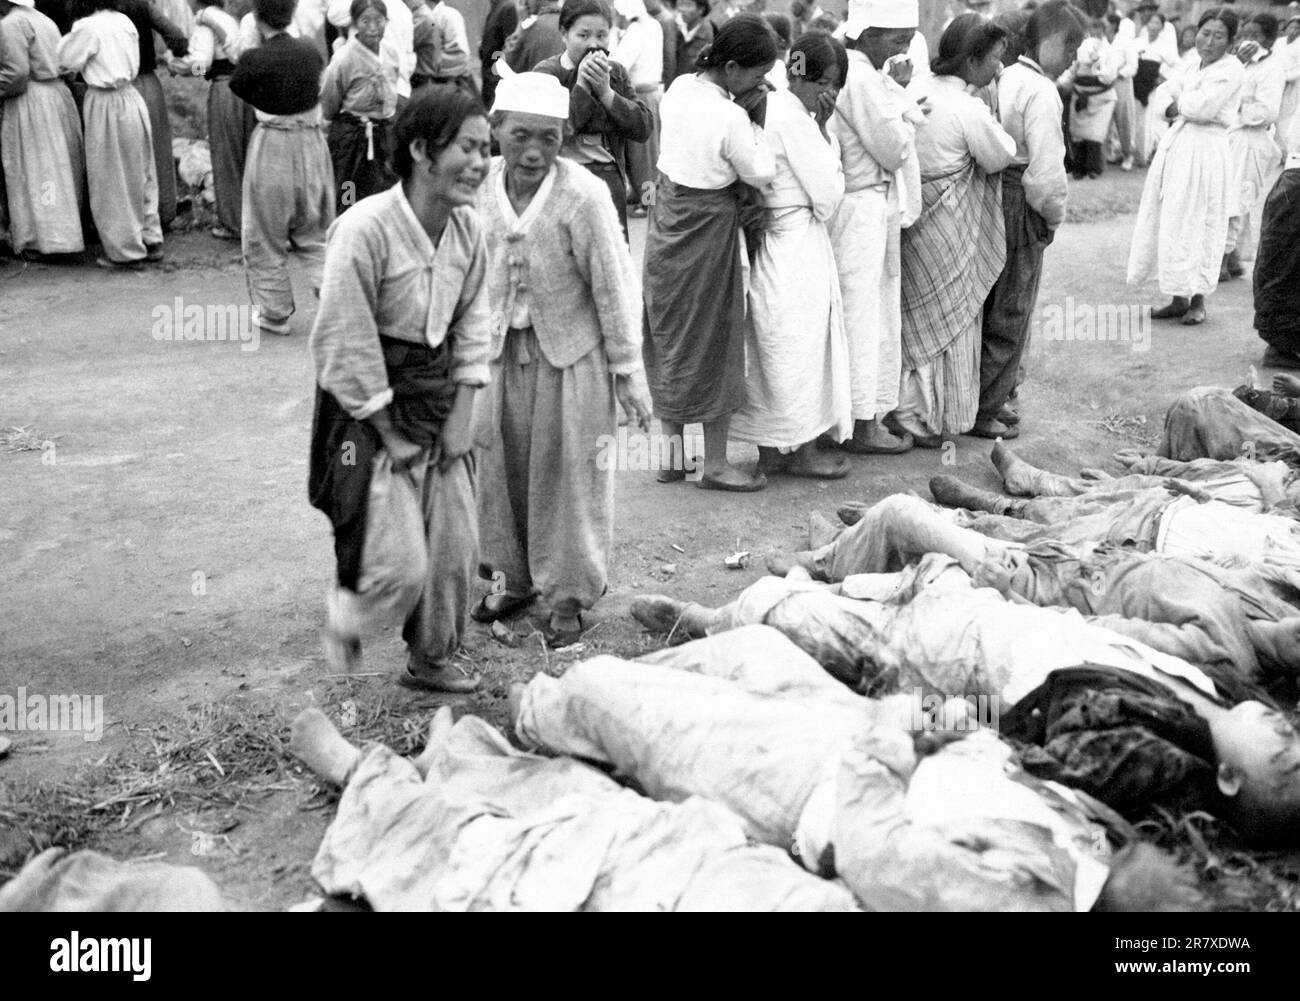 Koreans from Hamhung identify the bodies of some 300 political prisoners who were killed by the North Korean Army by being forced into caves which were subsequently sealed off so that they died of suffocation.  October 19, 1950. Stock Photo